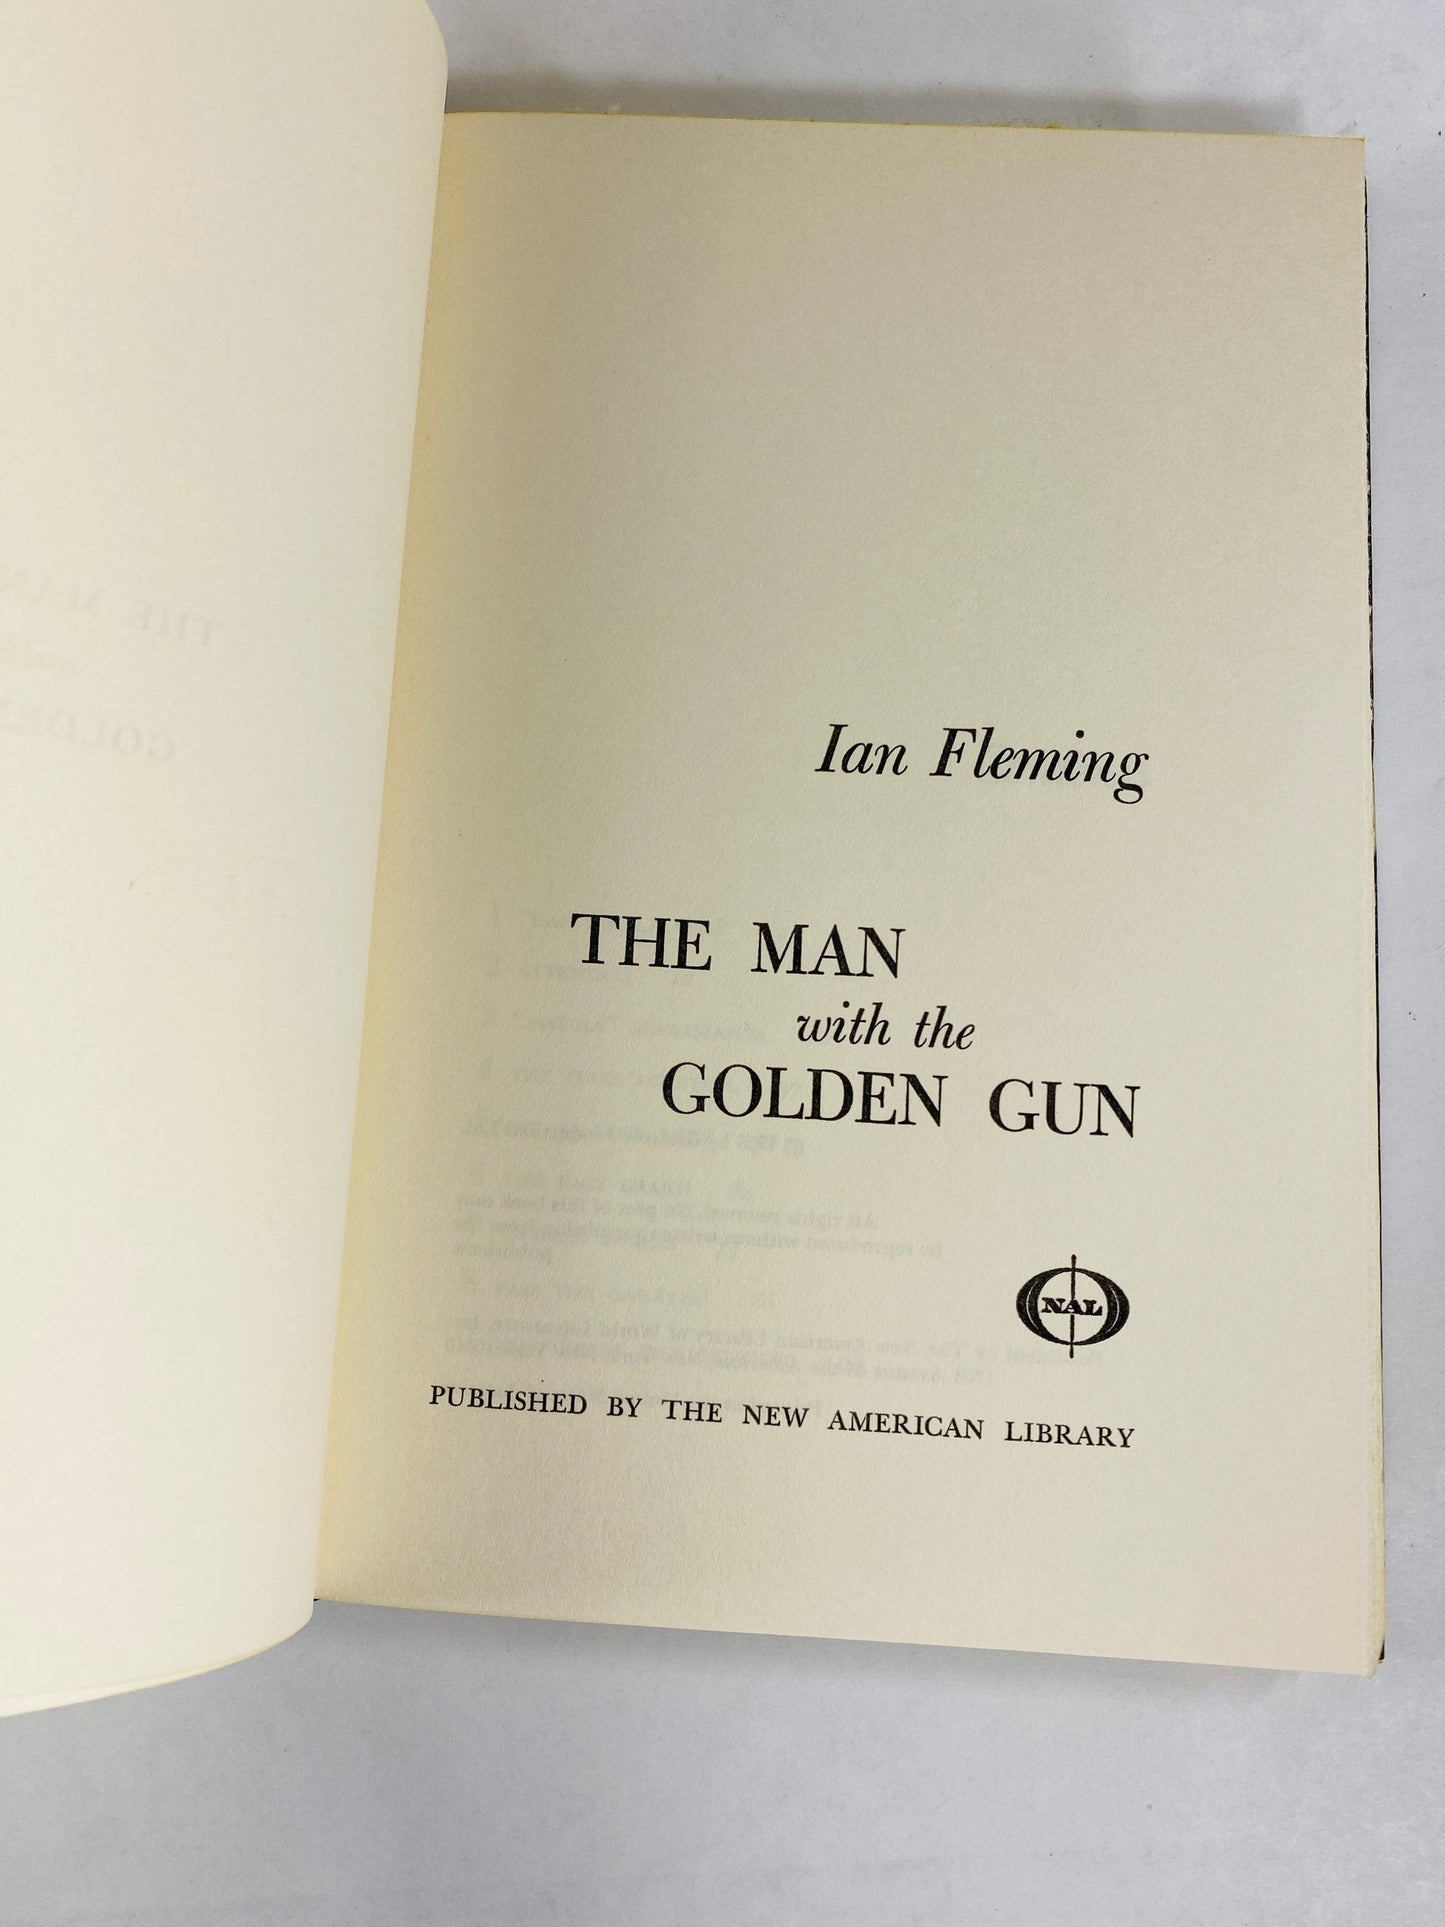 James Bond The Man with the Golden Gun vintage book by Ian Fleming EARLY PRINTING circa 1965 with dust jacket BCE